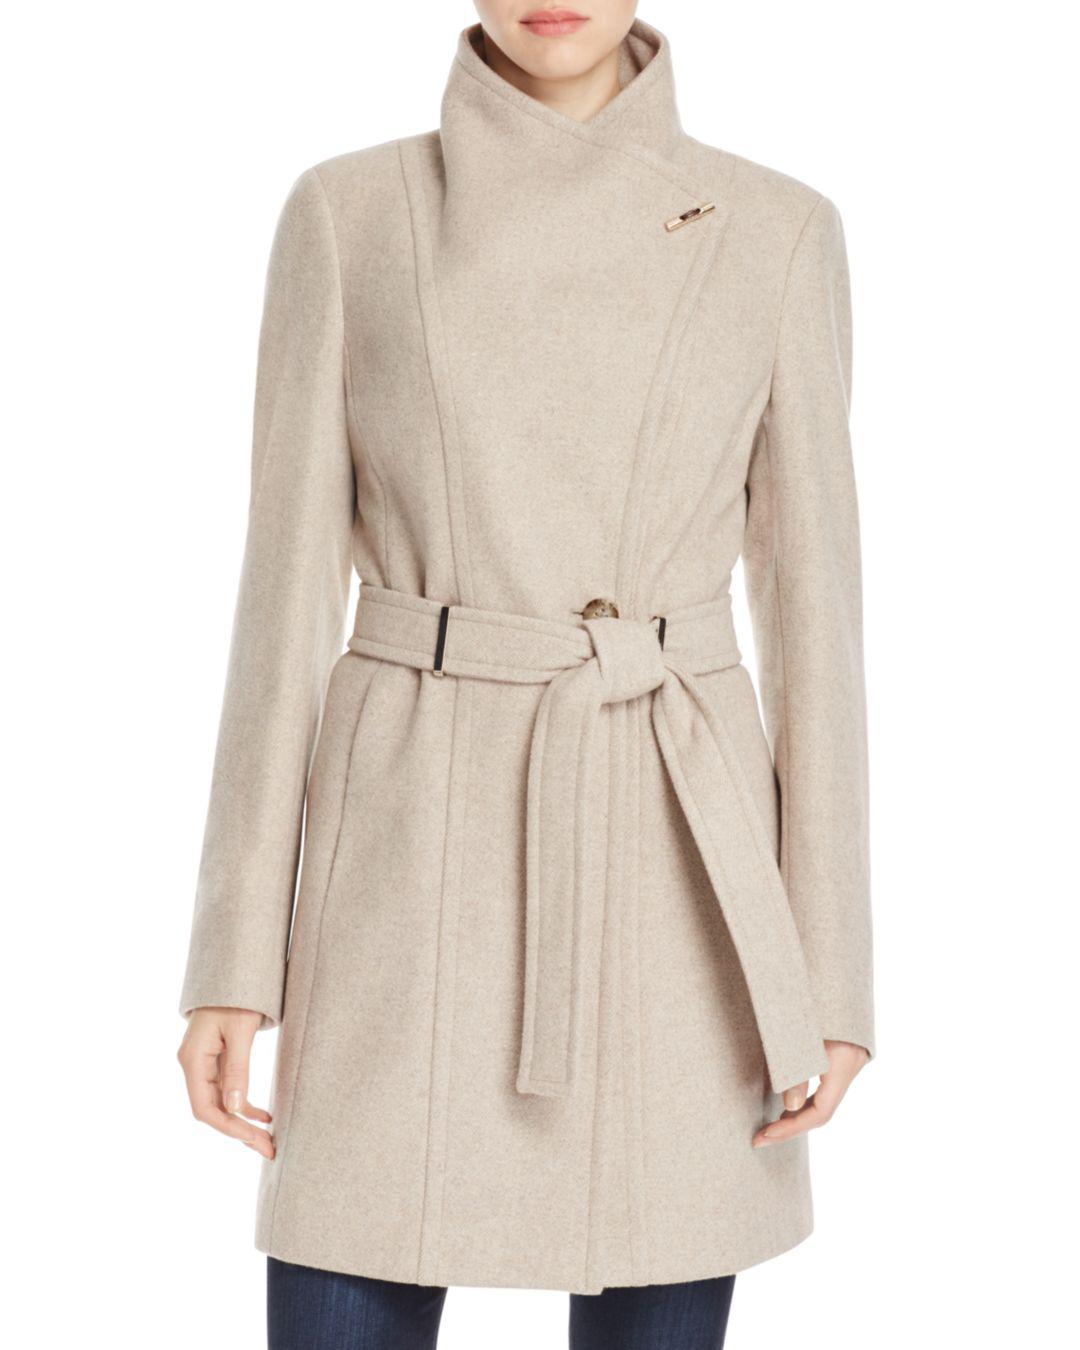 Calvin Klein Toggle Wrap Coat in Natural - Save 11% - Lyst